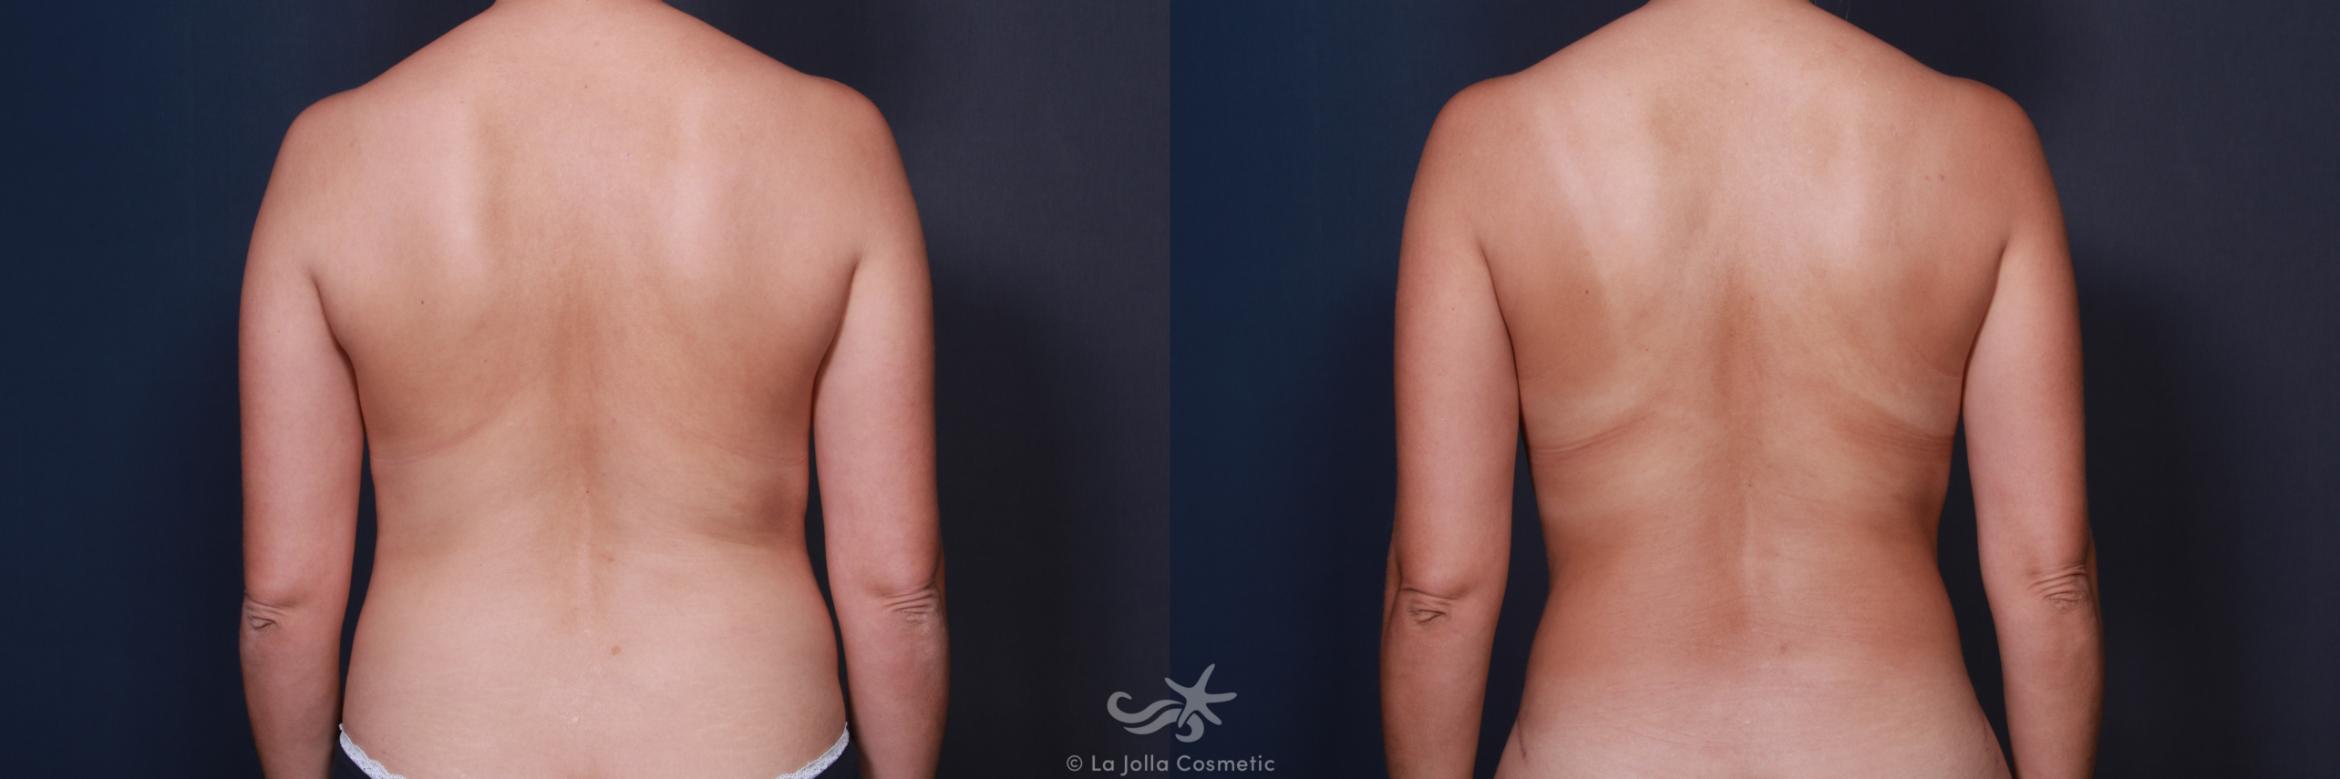 Before & After Tummy Tuck Result 571 Back View in San Diego, CA